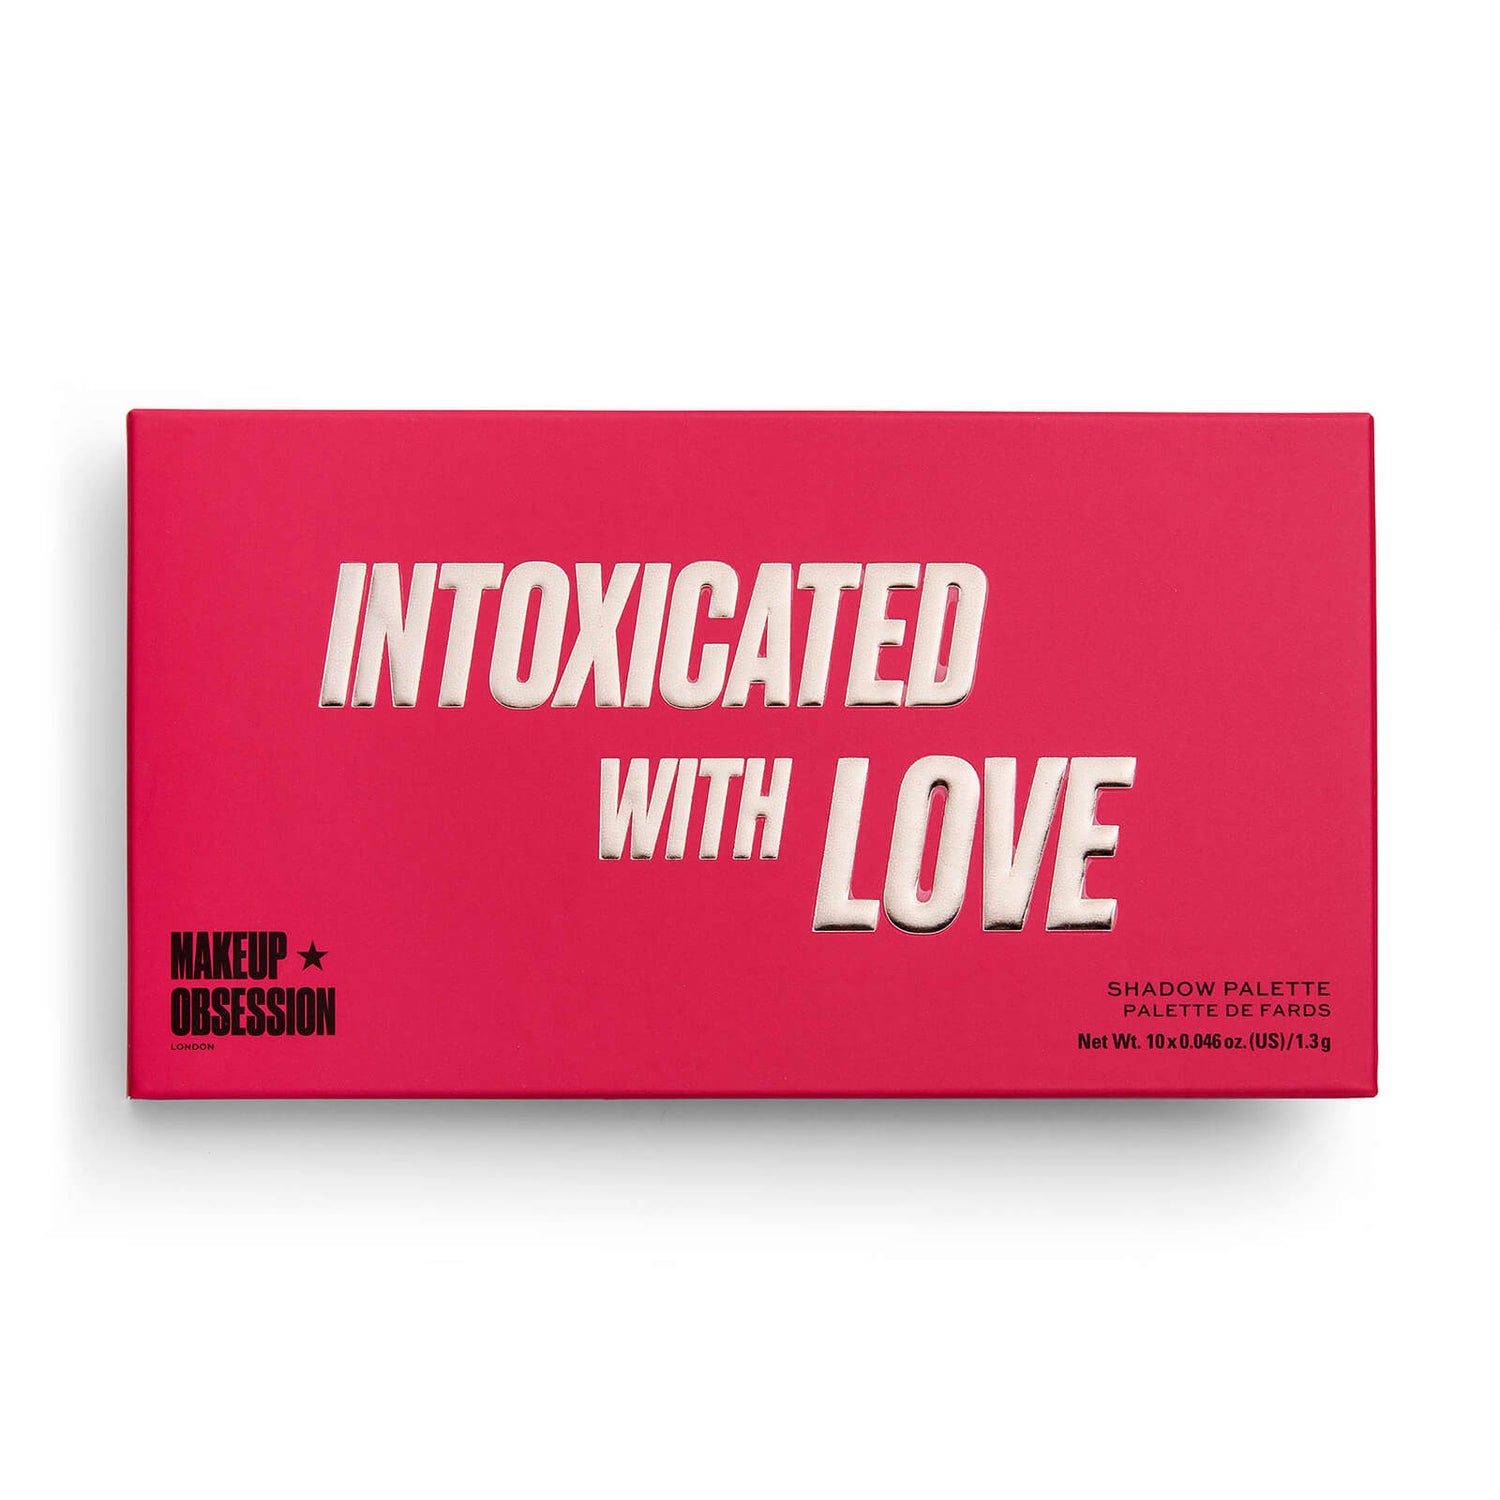 Makeup Obsession Shadow Palette - Intoxicated by Love